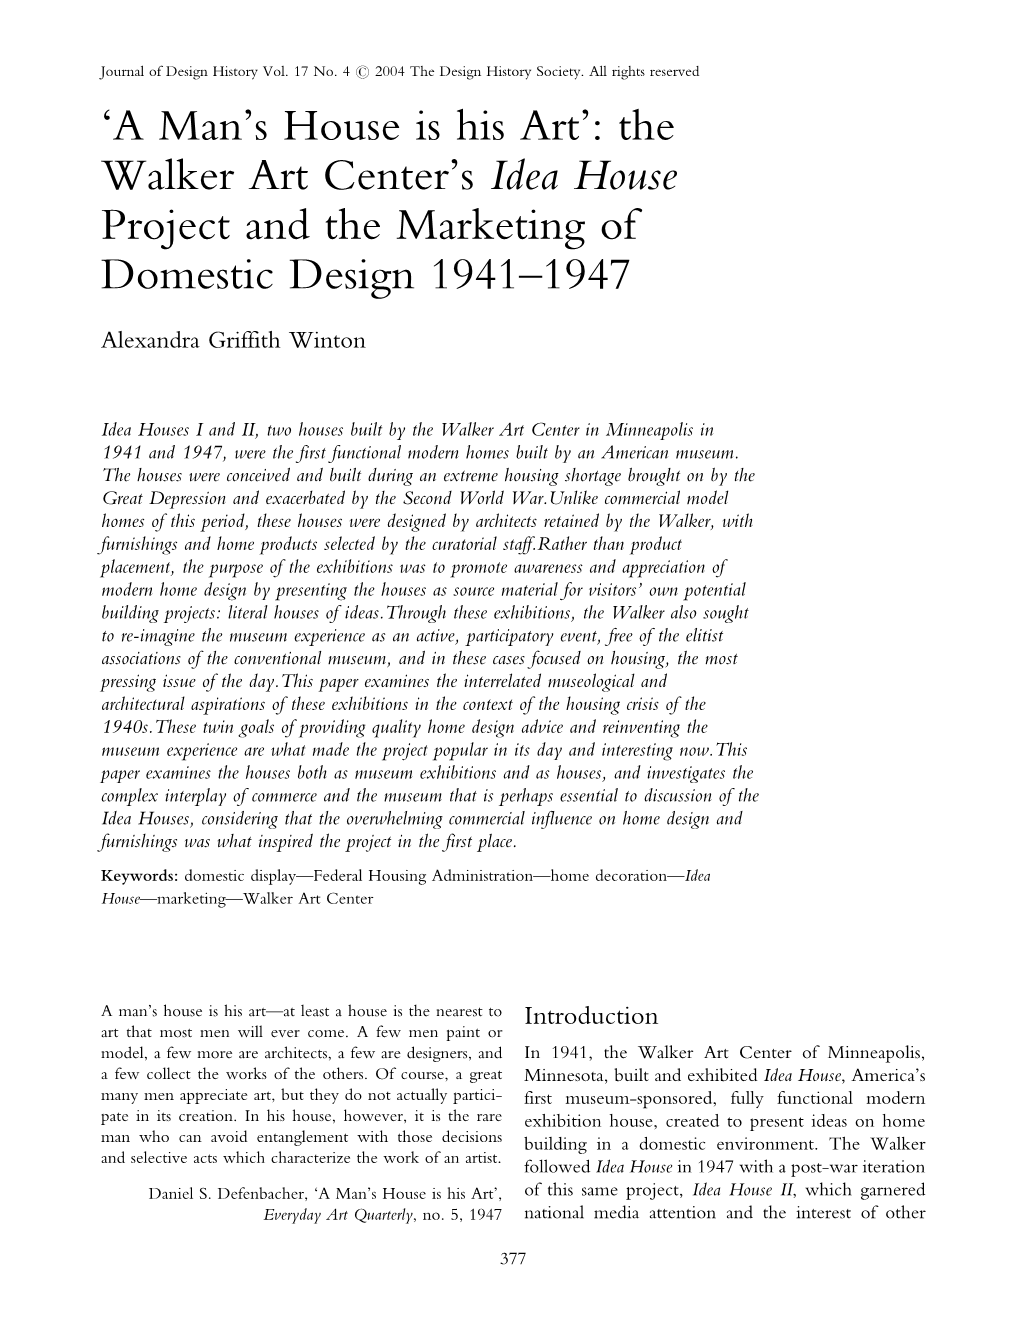 A Man's House Is His Art': the Walker Art Center's Idea House Project and the Marketing of Domestic Design 1941±1947